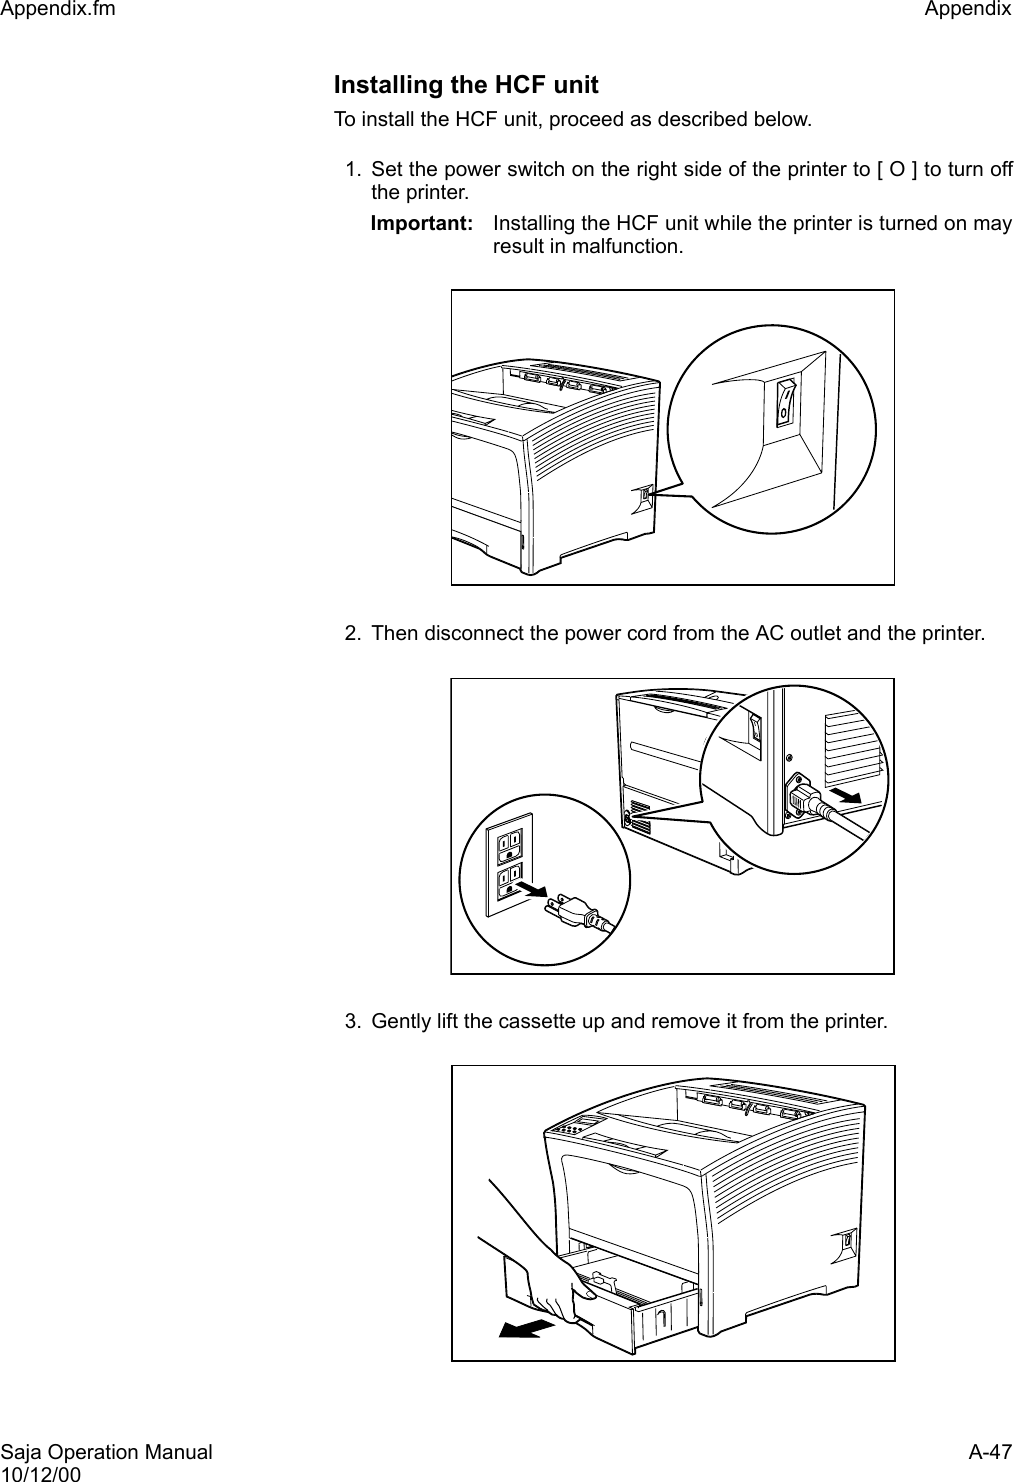 Saja Operation Manual A-4710/12/00Appendix.fm Appendix Installing the HCF unitTo install the HCF unit, proceed as described below. 1. Set the power switch on the right side of the printer to [ O ] to turn offthe printer. Important: Installing the HCF unit while the printer is turned on mayresult in malfunction. 2. Then disconnect the power cord from the AC outlet and the printer.3. Gently lift the cassette up and remove it from the printer.